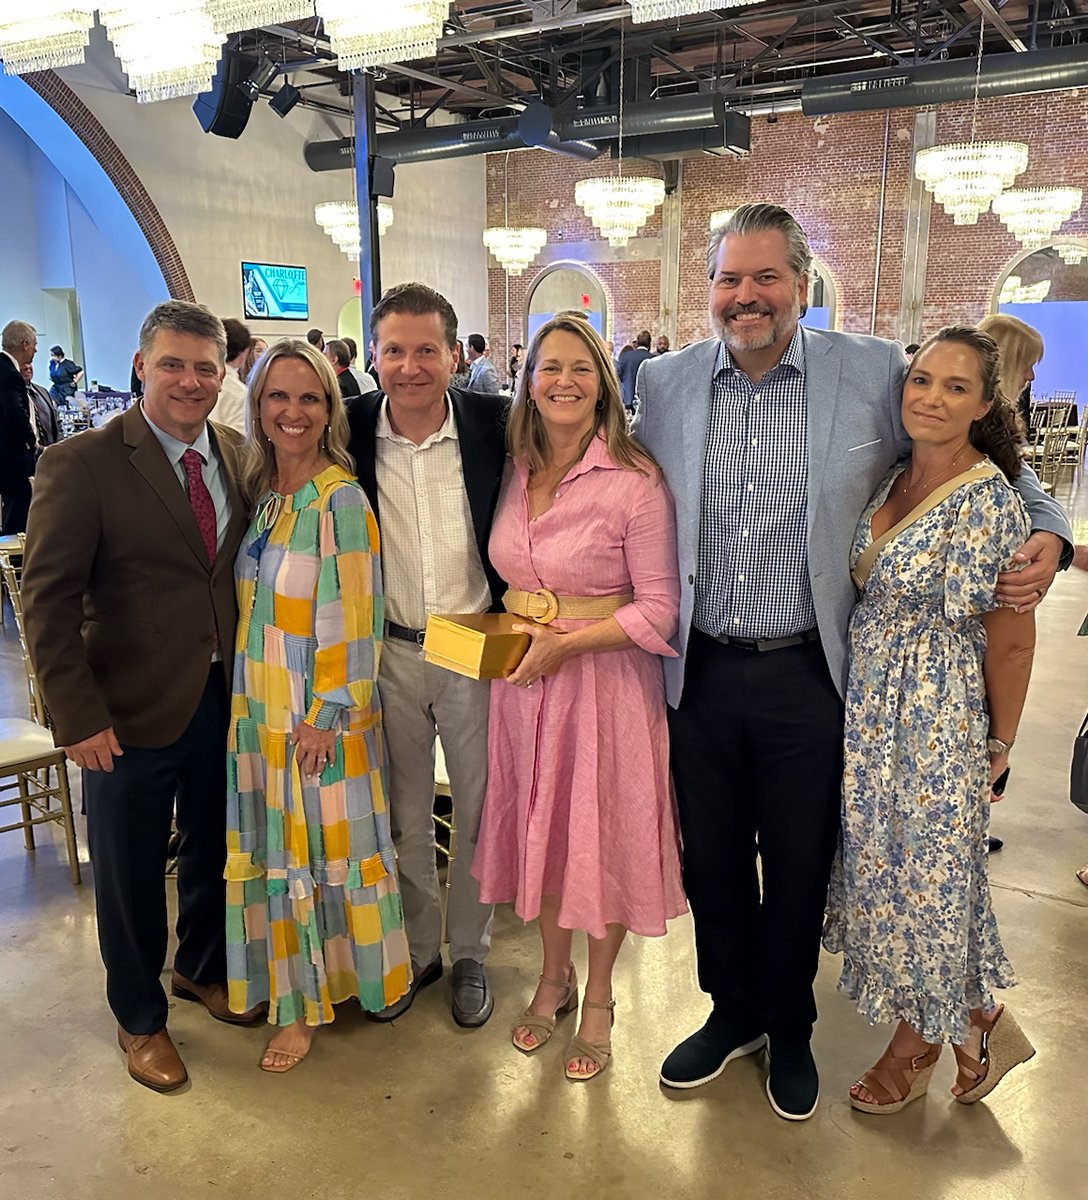 A heartfelt congratulations to Mark & Casey for their outstanding achievement at the @CLThistory 's Gem Awards💎last Thursday! Thank you for allowing us to be part of your special moment! 🎉 #charlottemuseumofhistory #charlottehistory #charlottepreservation #award